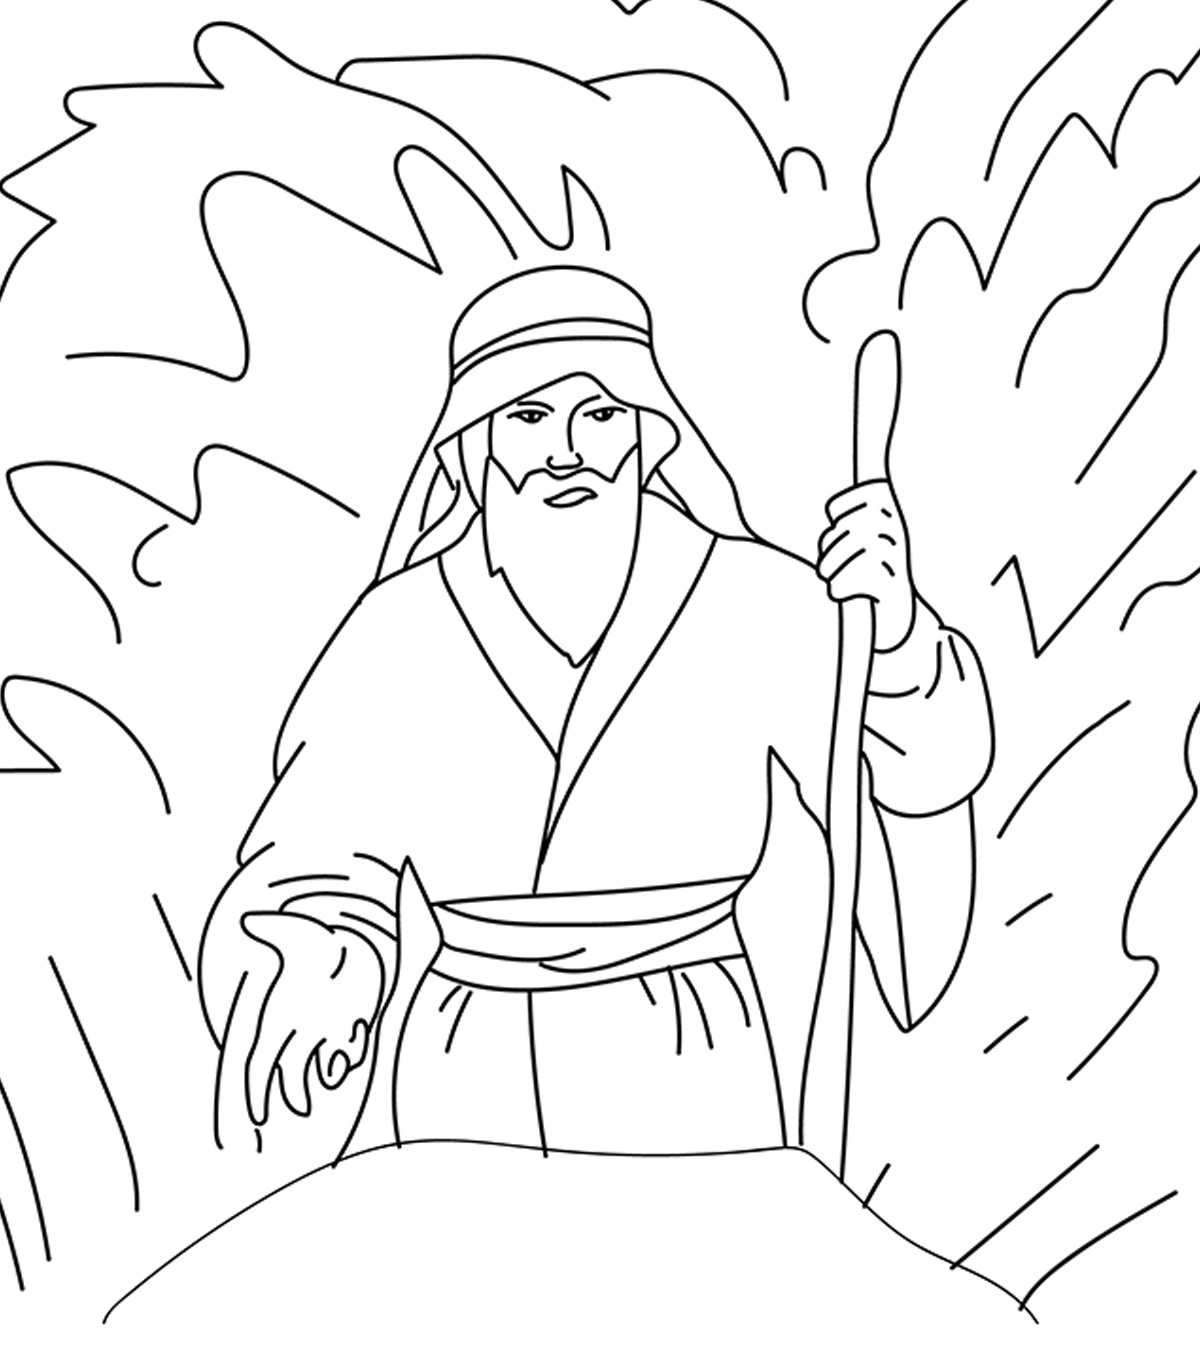 Coloring Pages Frozen 2 Pyramids Of ...golfrealestateonline.com